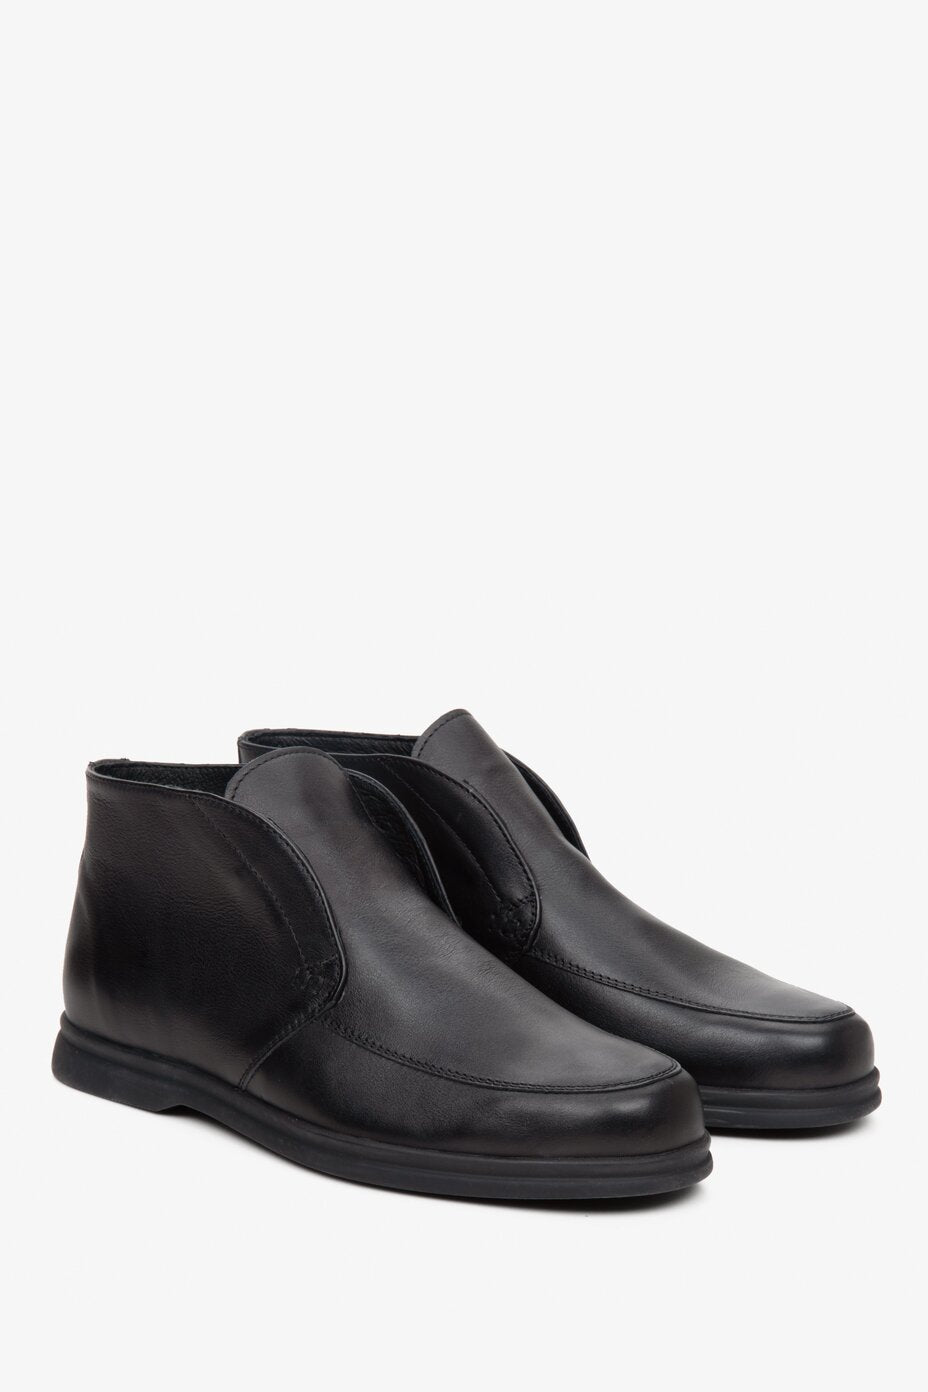 Men's Estro slip-on boots made of black natural leather - close-up of the front and side of the boot.